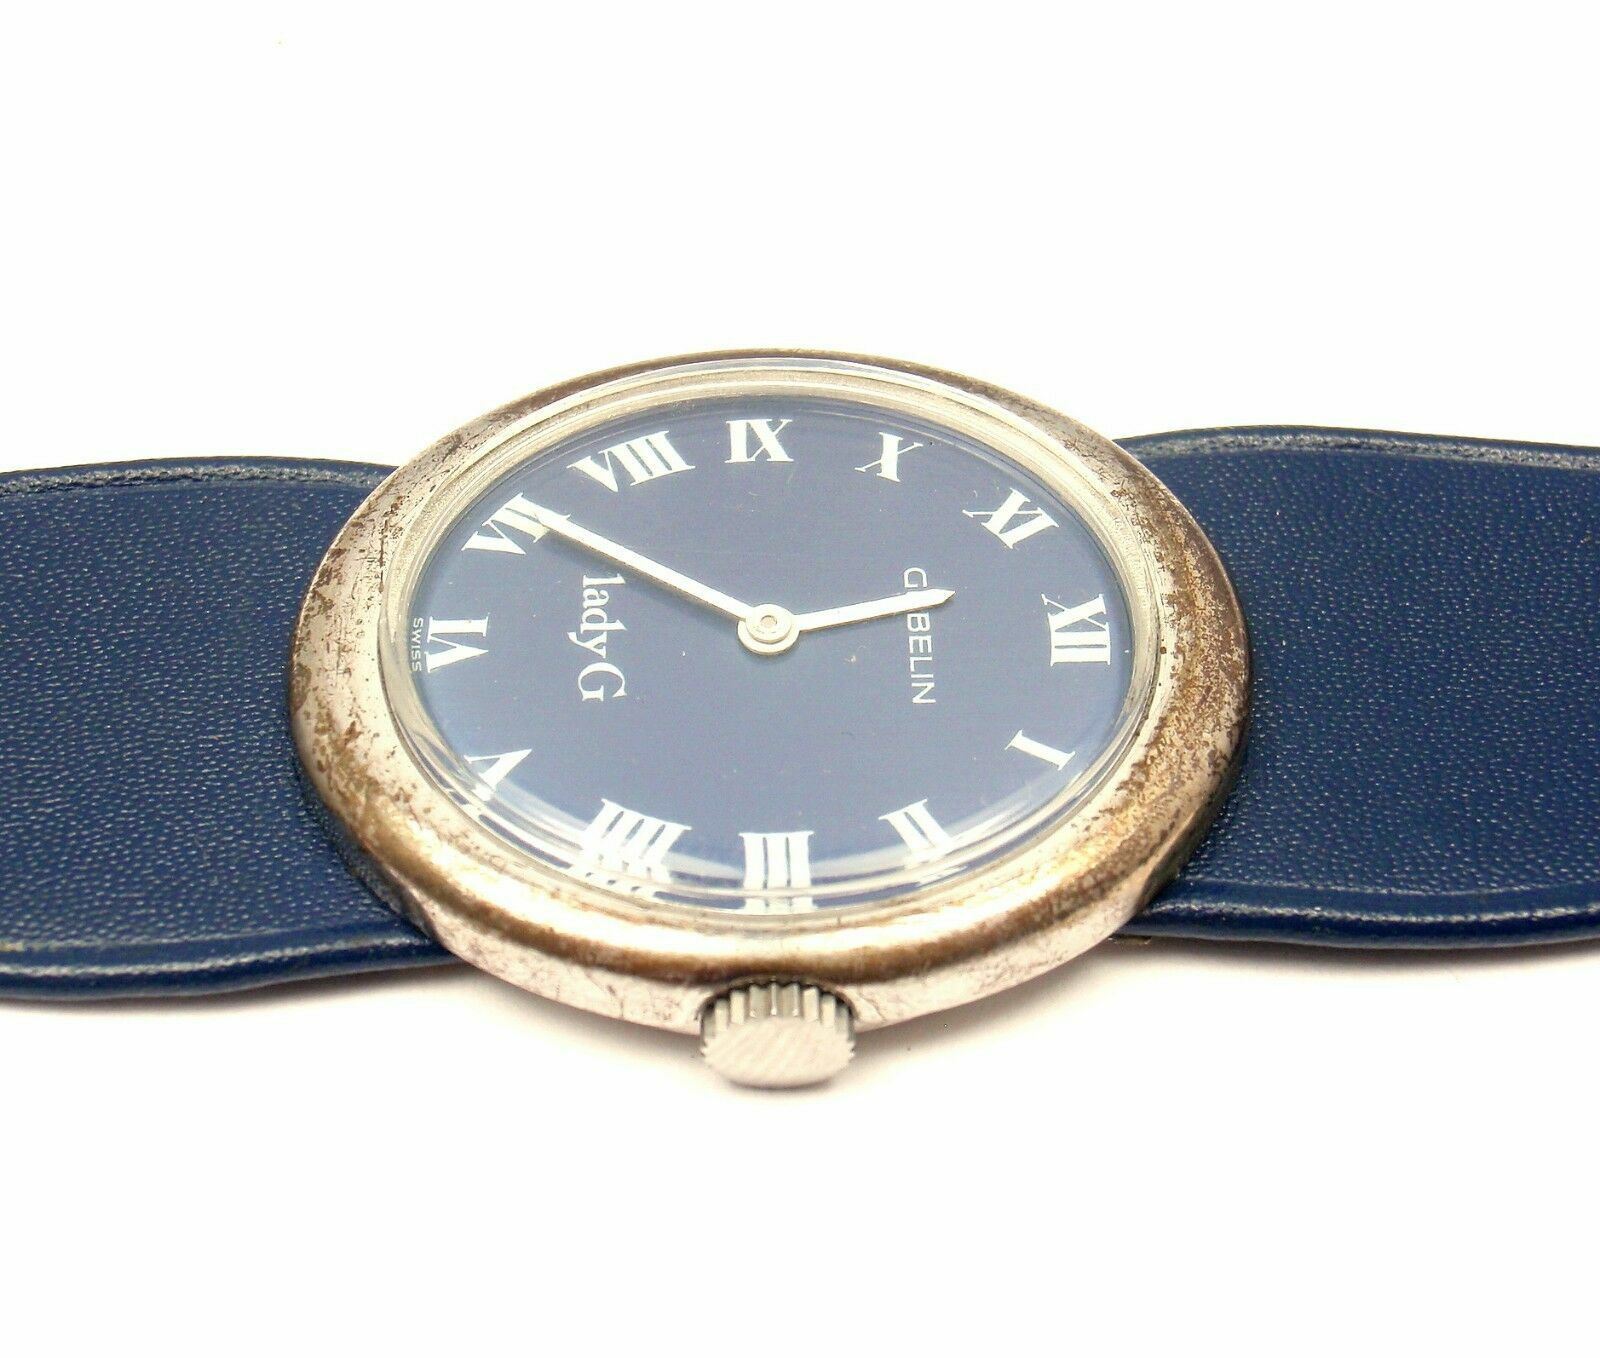 Gubelin Jewelry & Watches:Watches, Parts & Accessories:Watches:Wristwatches Rare! Vintage Sterling Silver Gubelin Lady G Manual Wind Ladies Watch